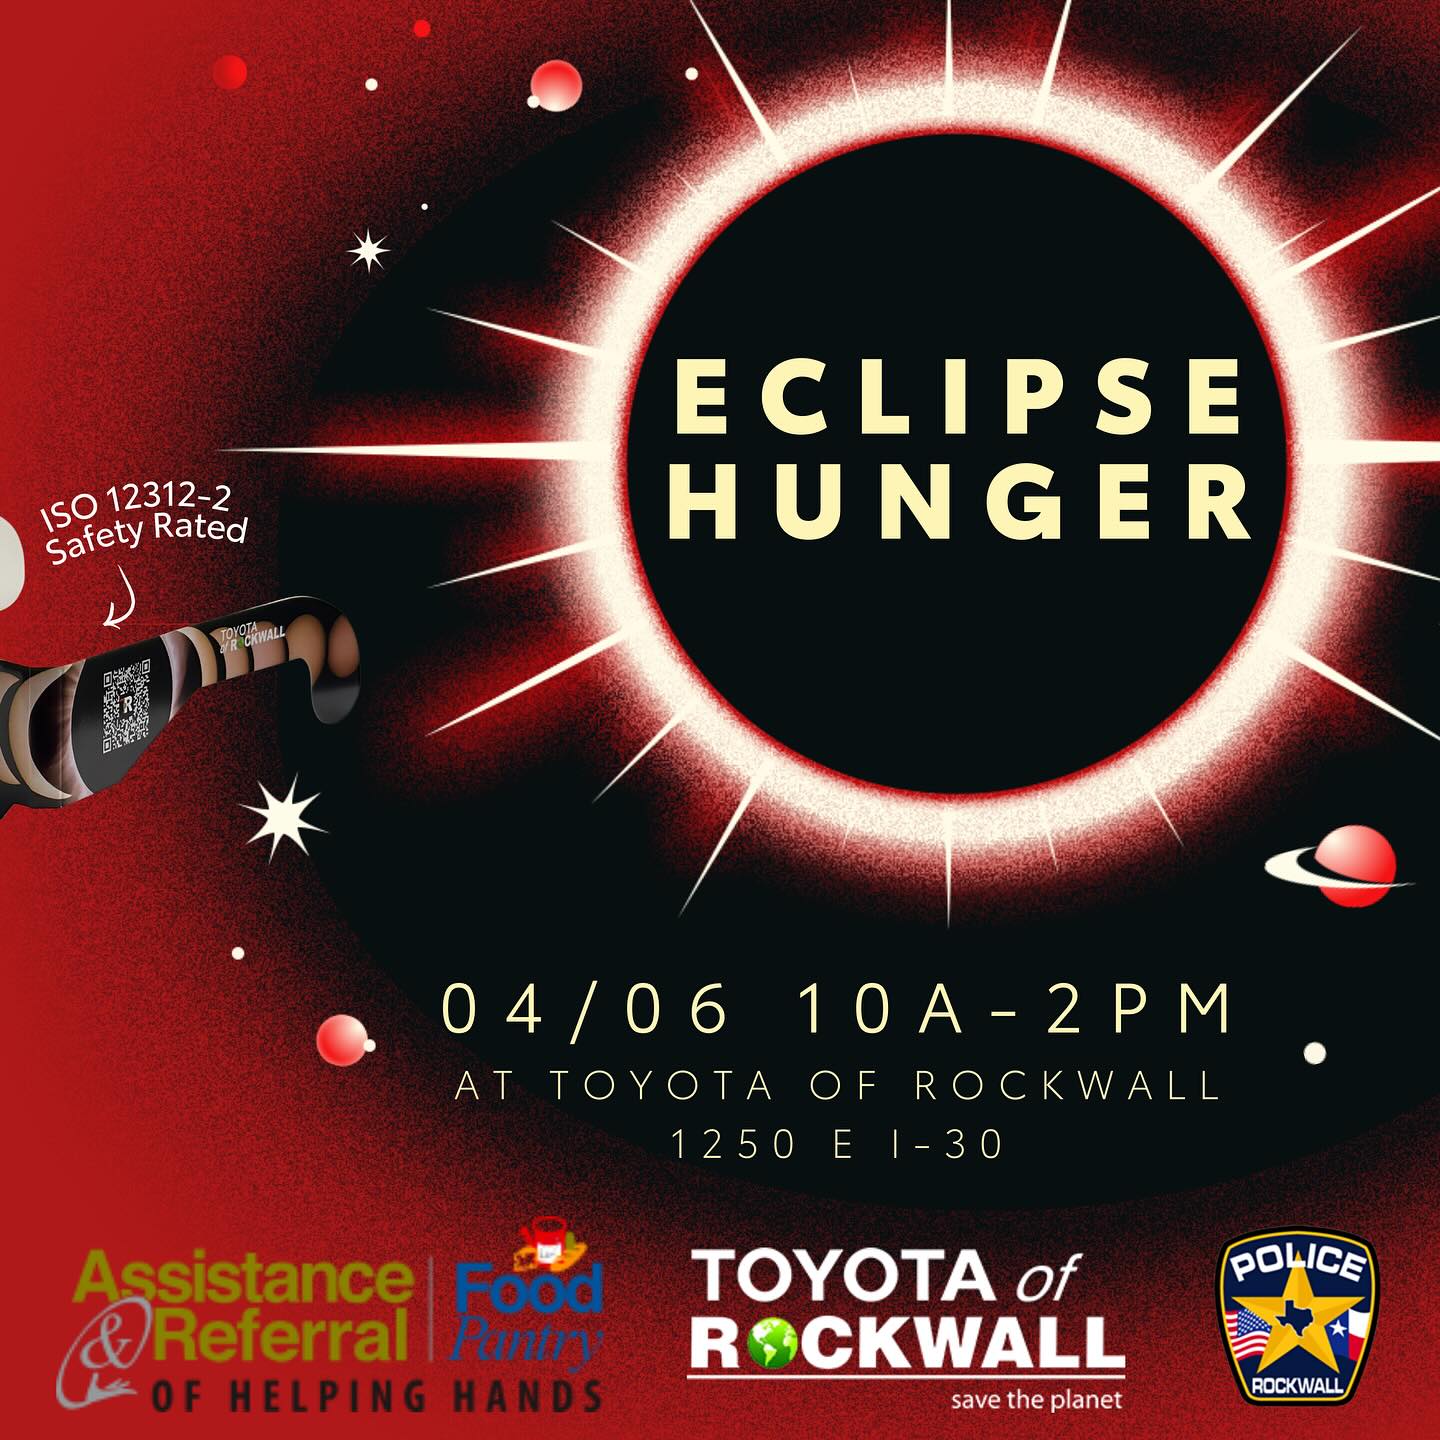 Rockwall police, Toyota of Rockwall partner with Helping Hands to ‘eclipse’ hunger